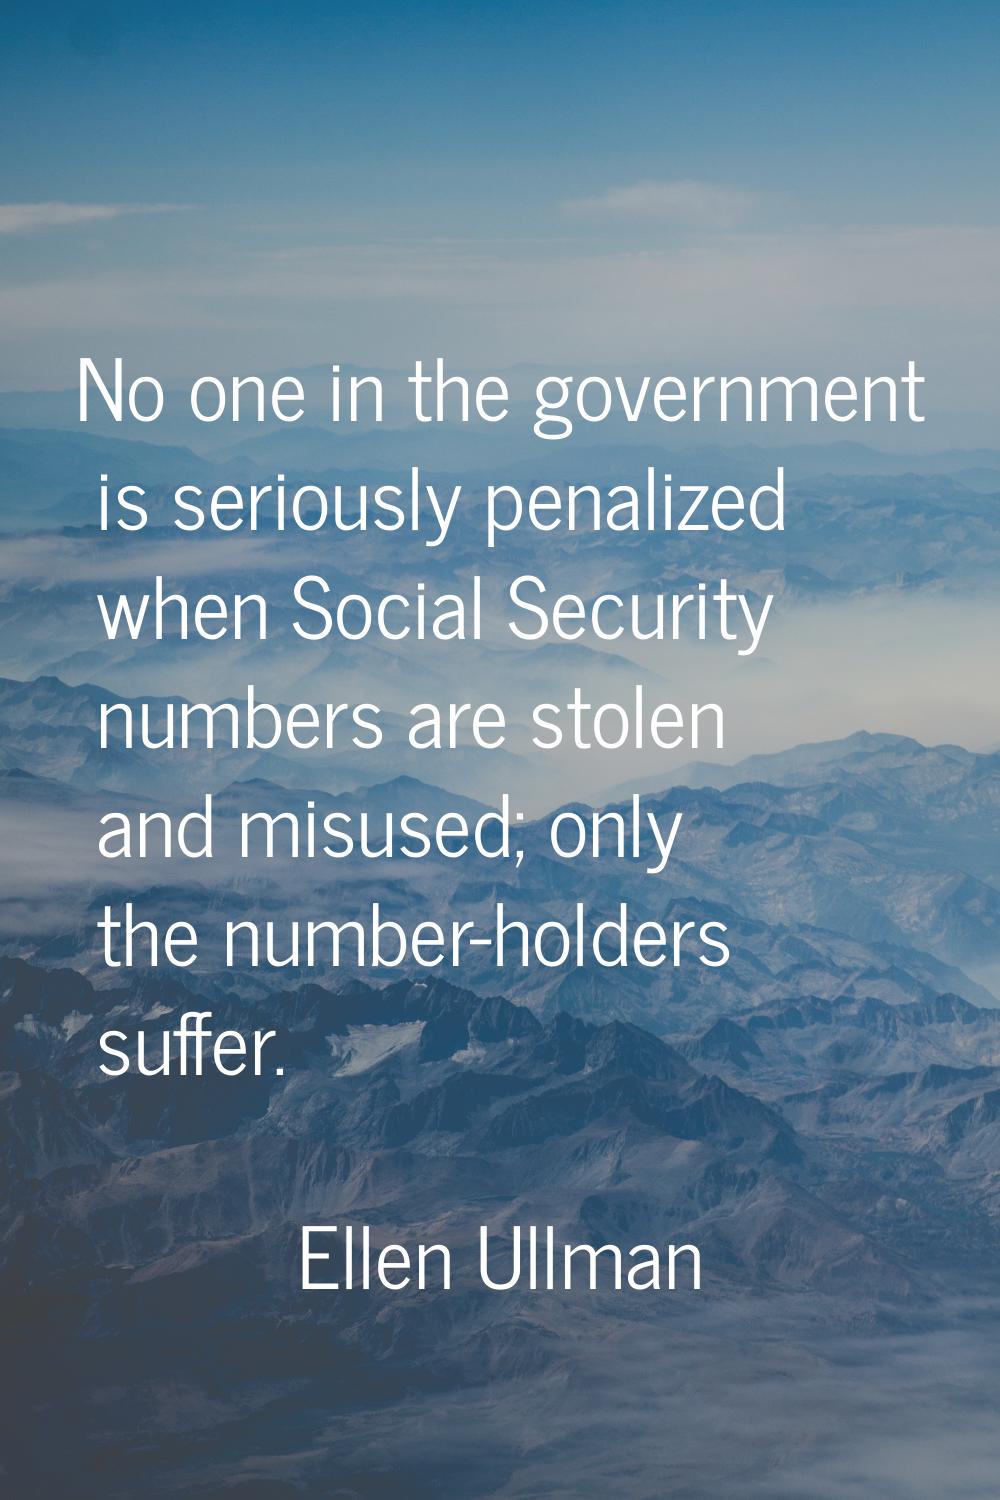 No one in the government is seriously penalized when Social Security numbers are stolen and misused